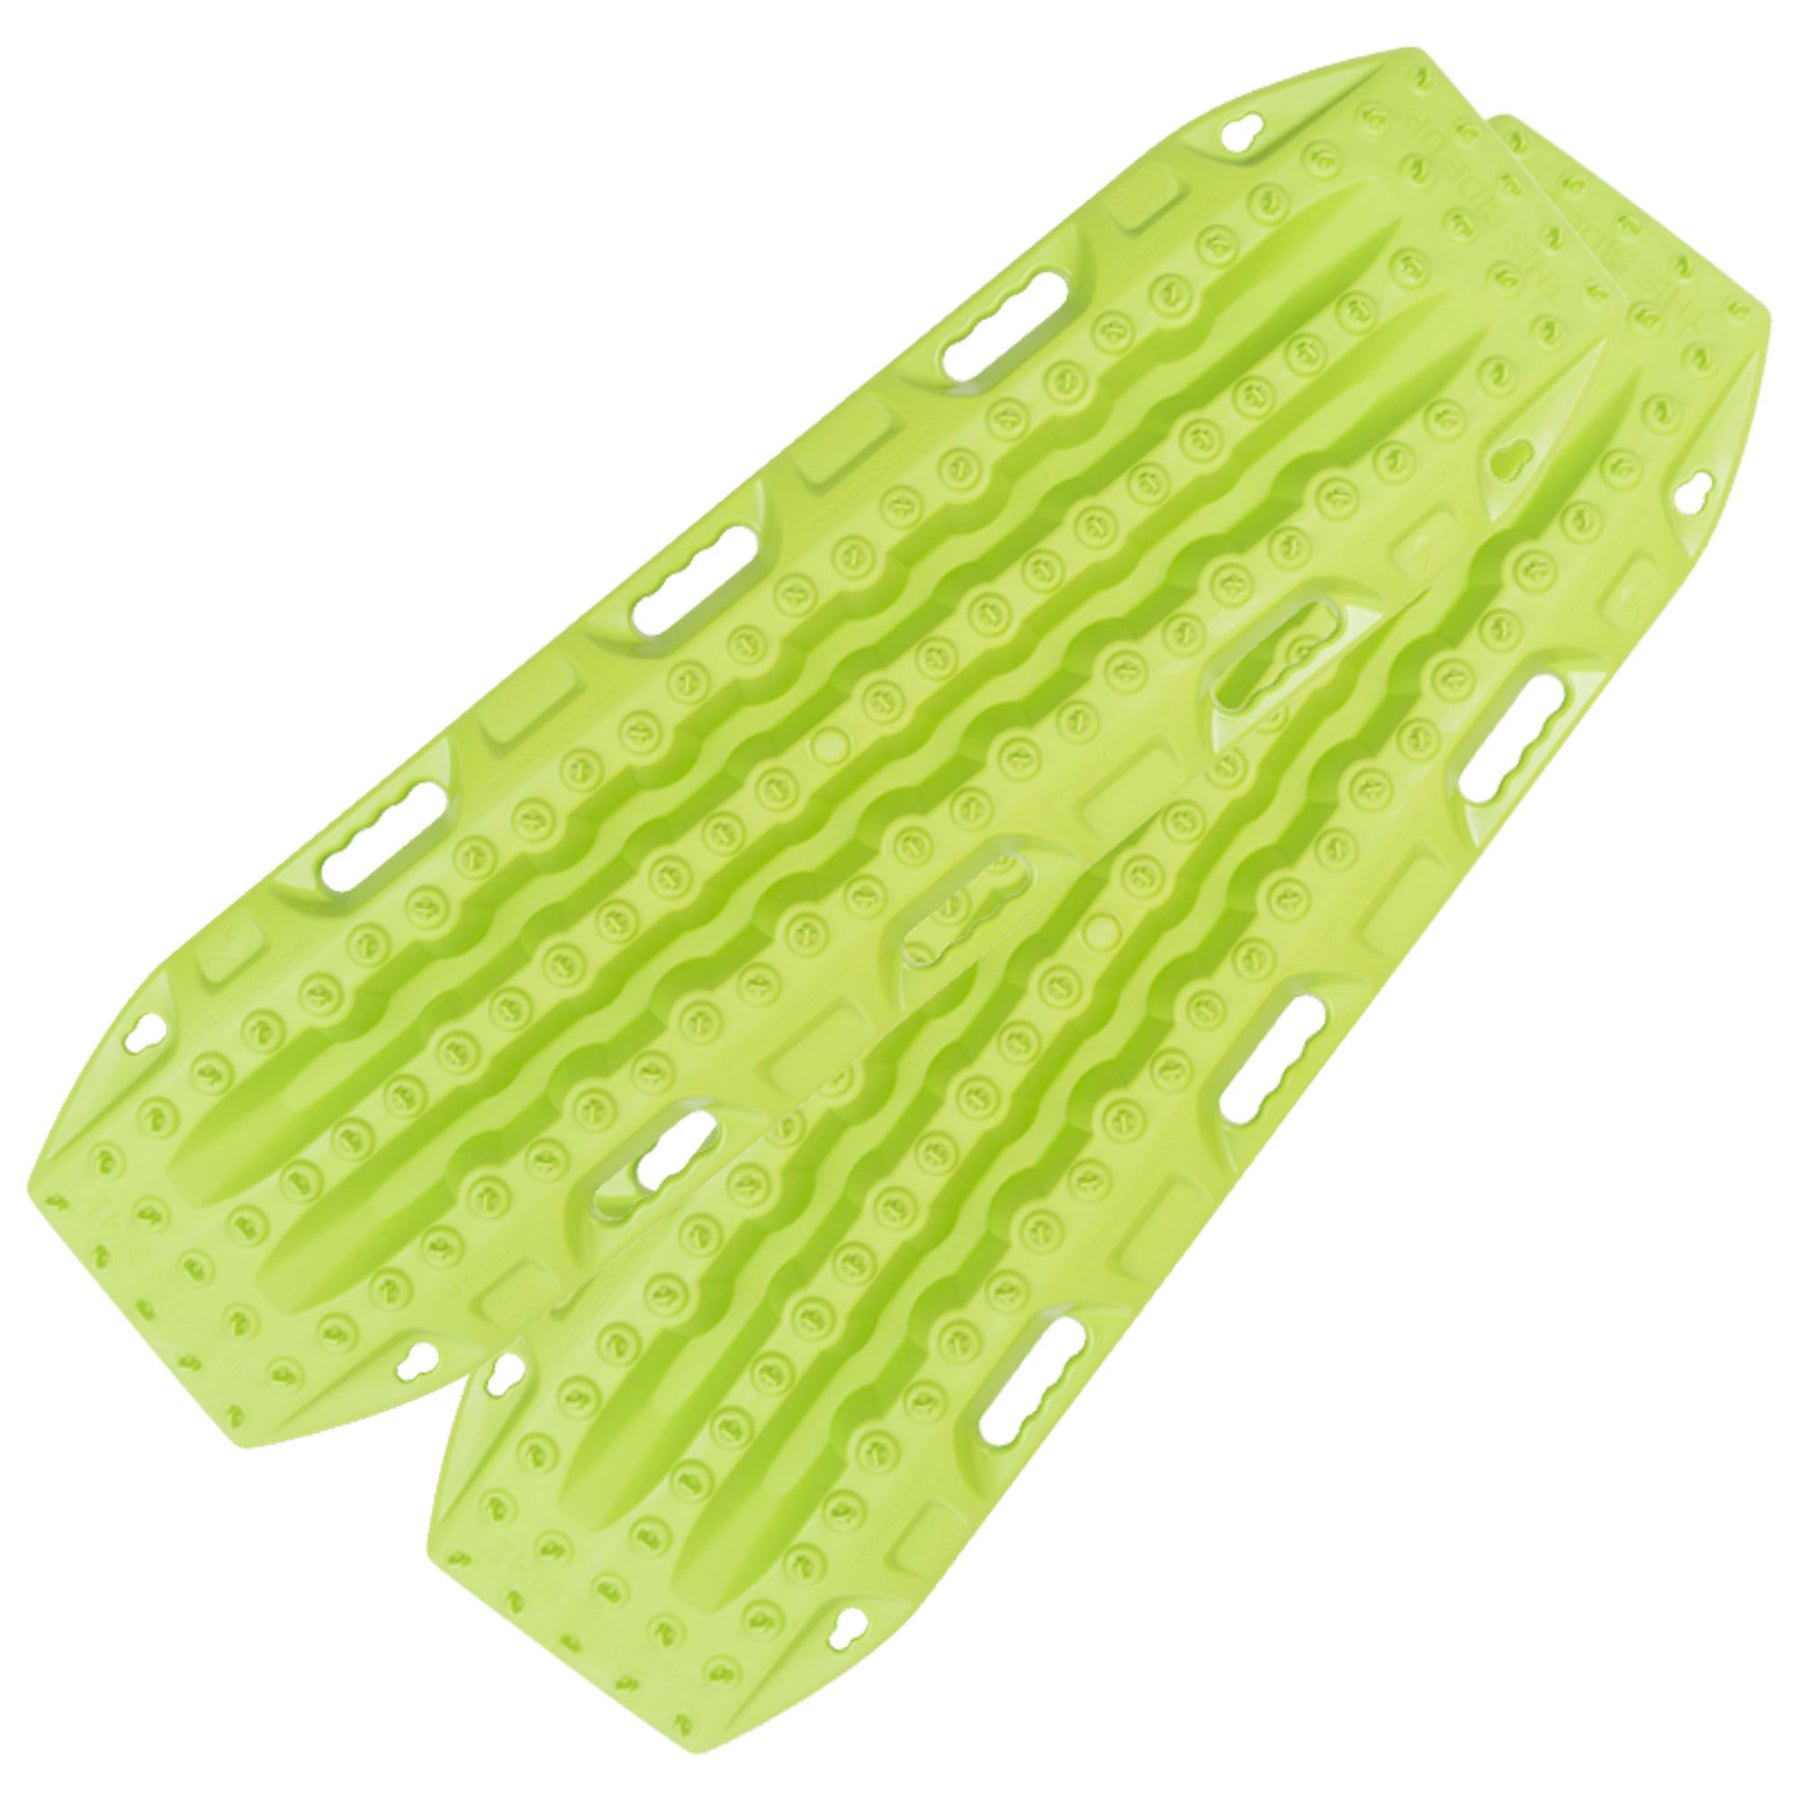 MAXTRAX MKII Lime Green Recovery Boards  Recovery Gear MAXTRAX- Overland Kitted